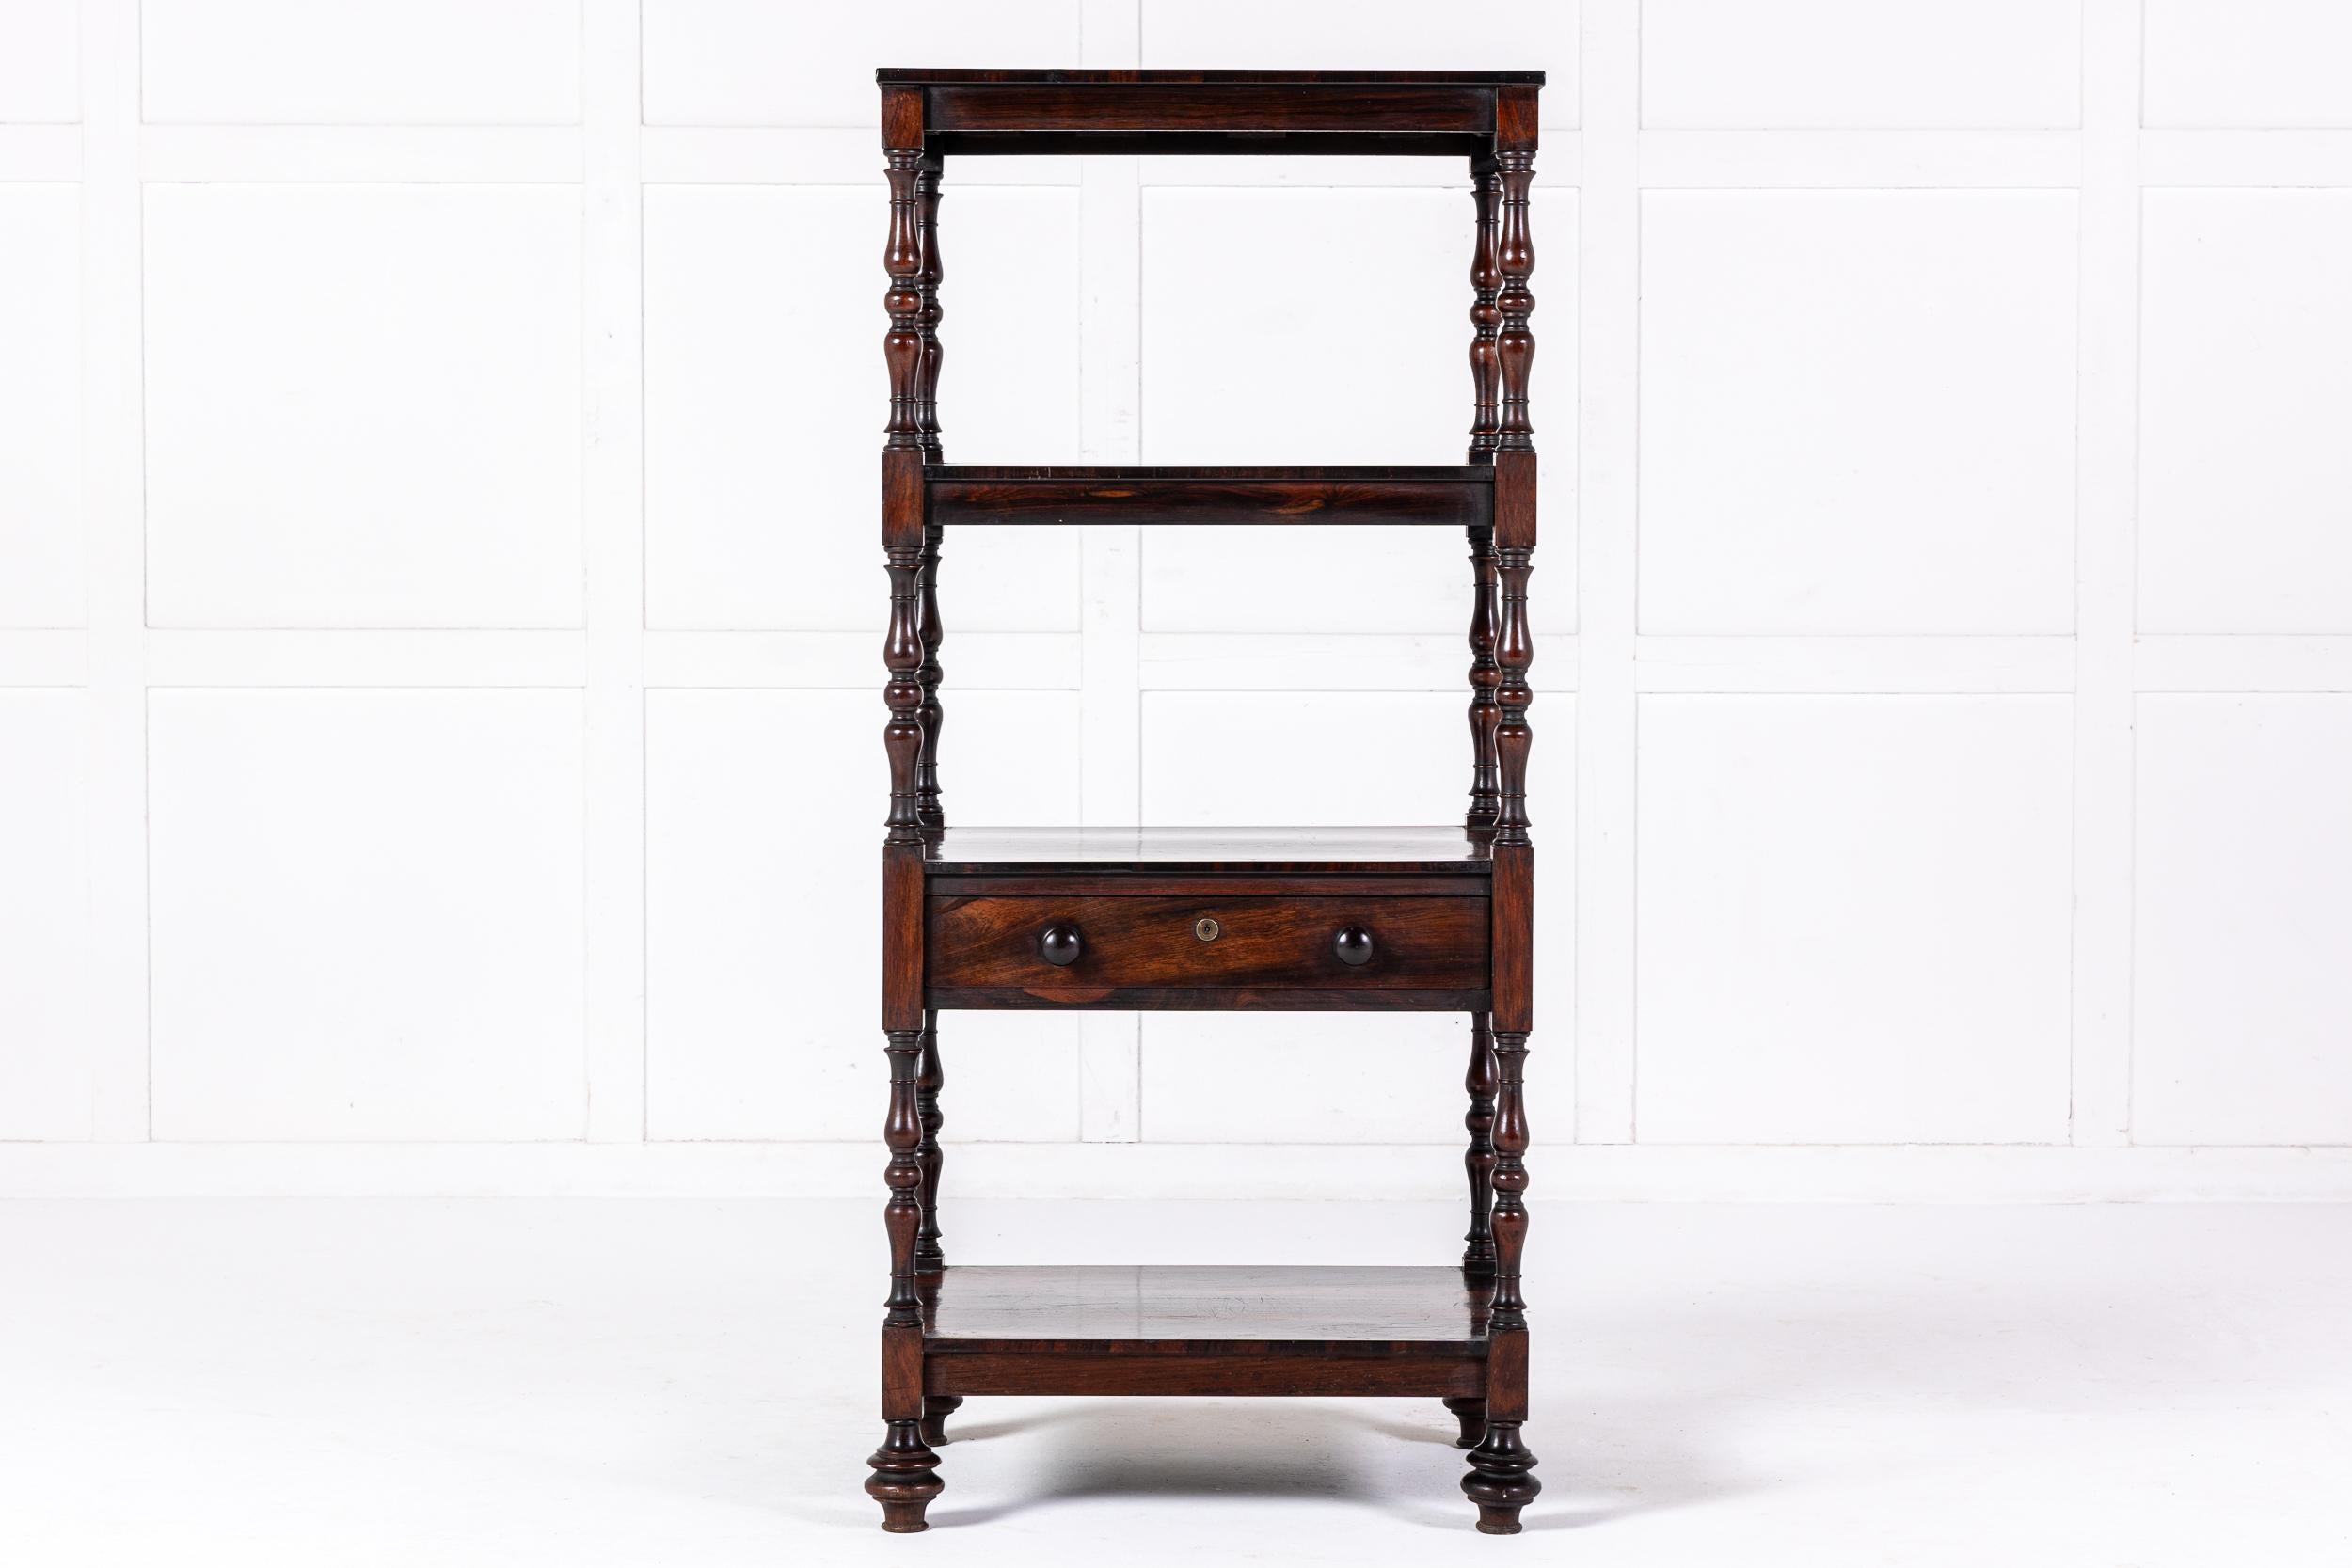 An Excellent Quality English Regency Period Rosewood Whatnot.

Consisting of four rosewood veneered shelves, one with a slim drawer, connected by four decorative turned columns and supported on unusually shaped turned feet.

What sets our piece